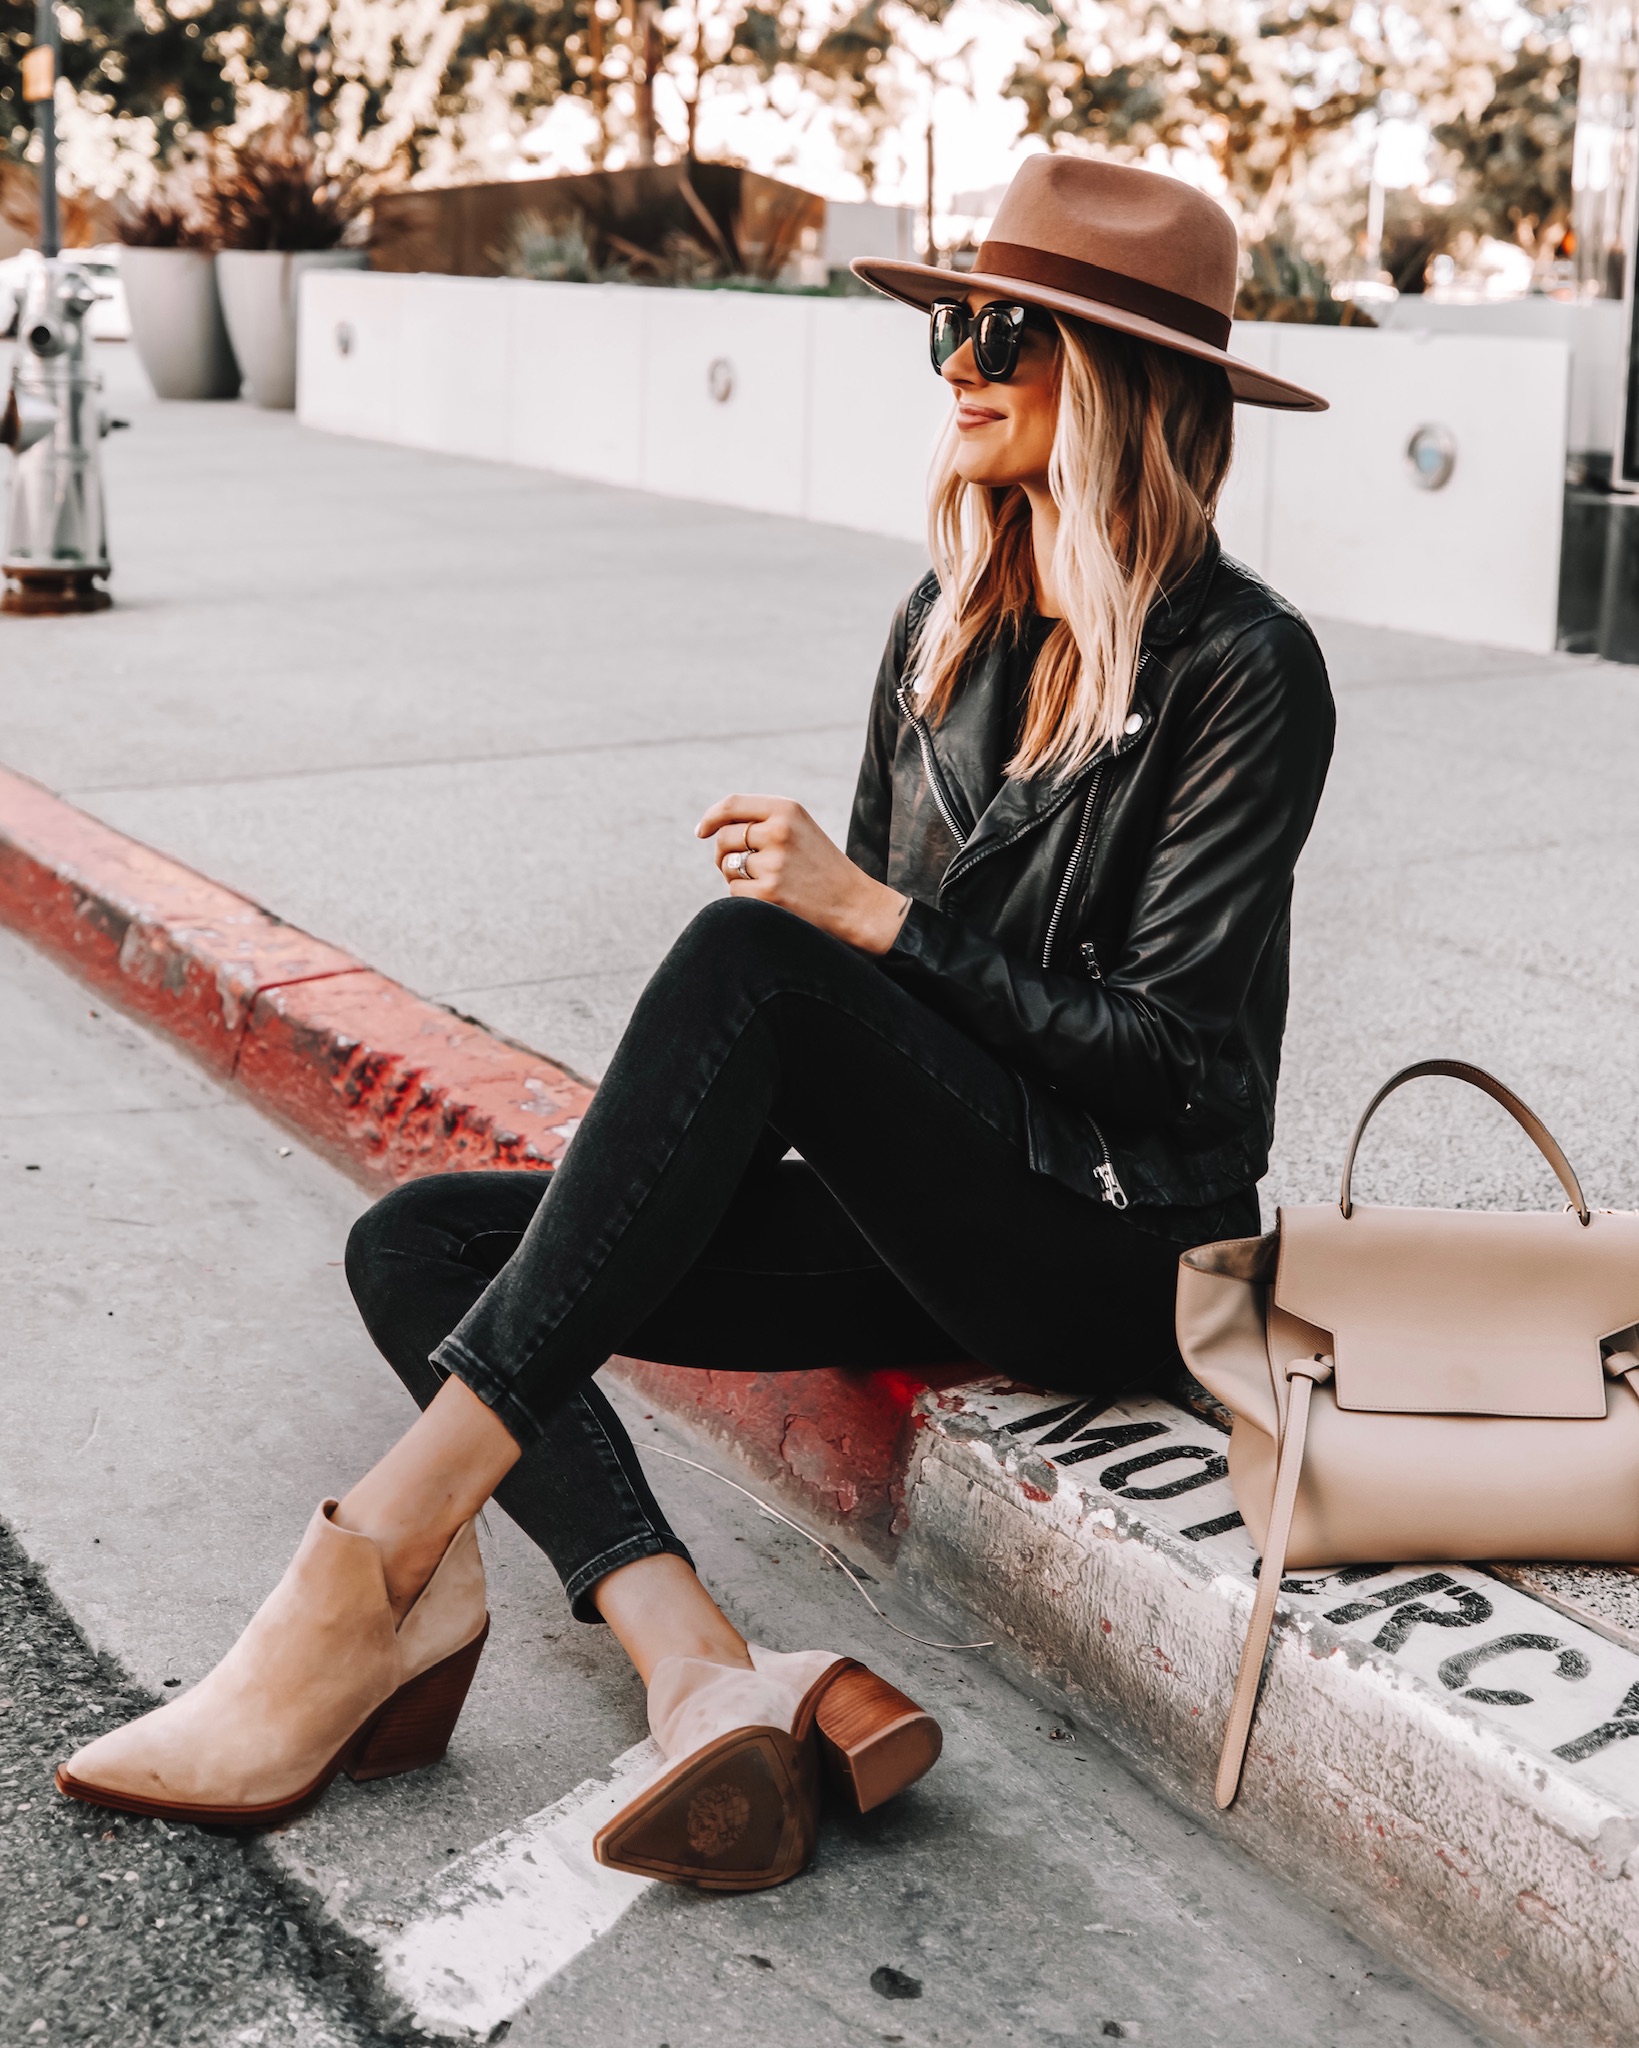 Fashion Jackson Wearing Black Leather Jacket Outfit Tan Hat Tan Booties, all black leather jacket outfit, ﻿womens leather jacket outfit,﻿﻿ ﻿madewell leather jacket outfit, ﻿﻿ ﻿casual leather jacket outfit, ﻿ ﻿﻿leather jacket and booties outfit